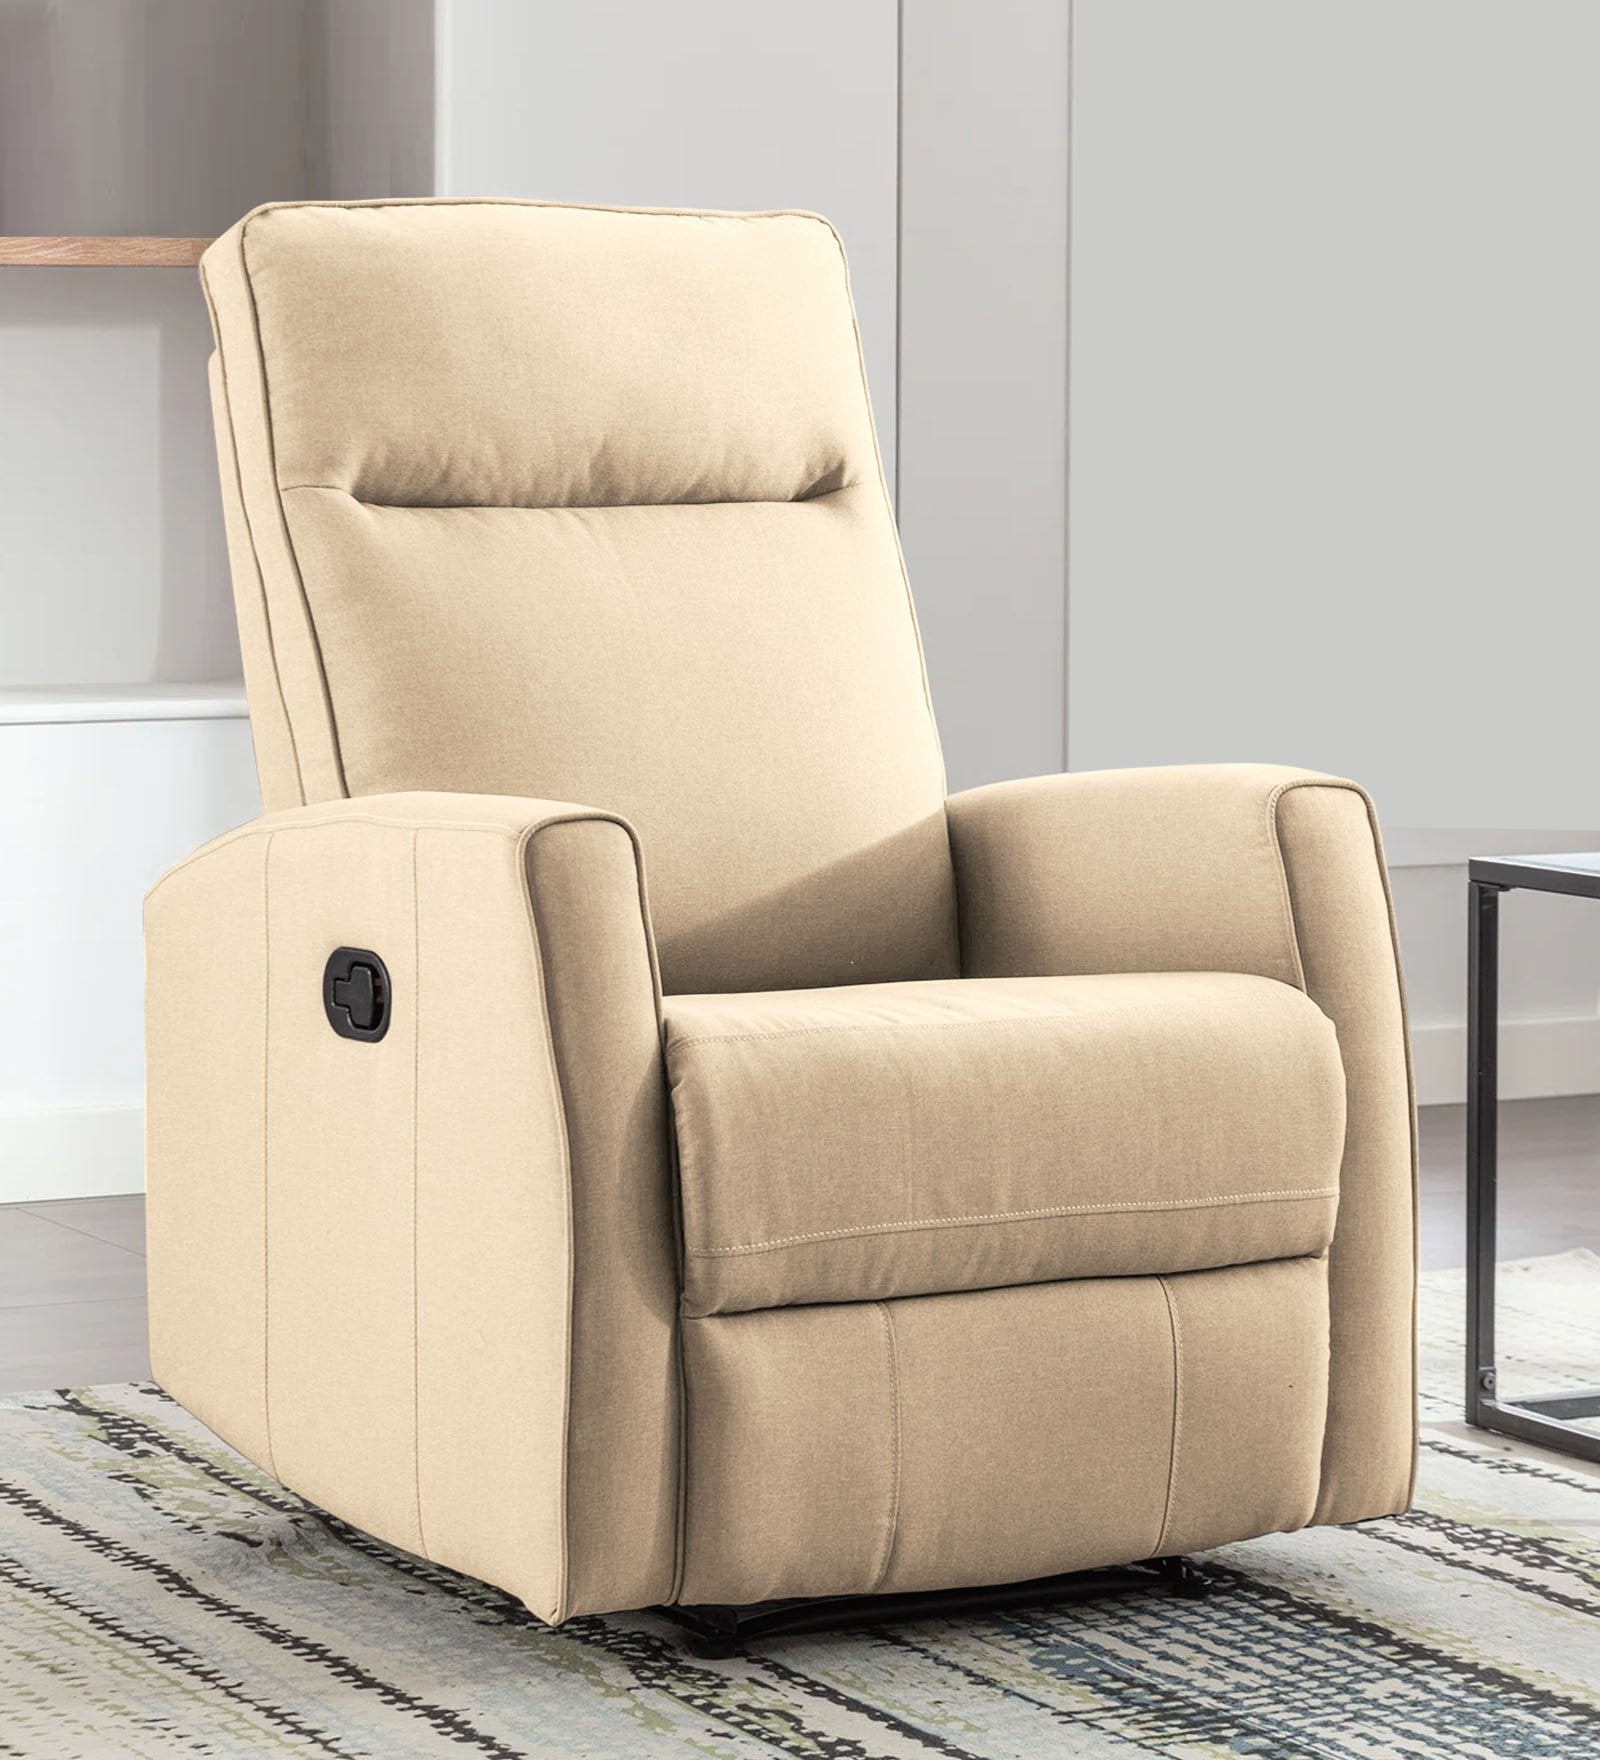 Logan Fabric Manual 1 Seater Recliner In ivory cream Colour